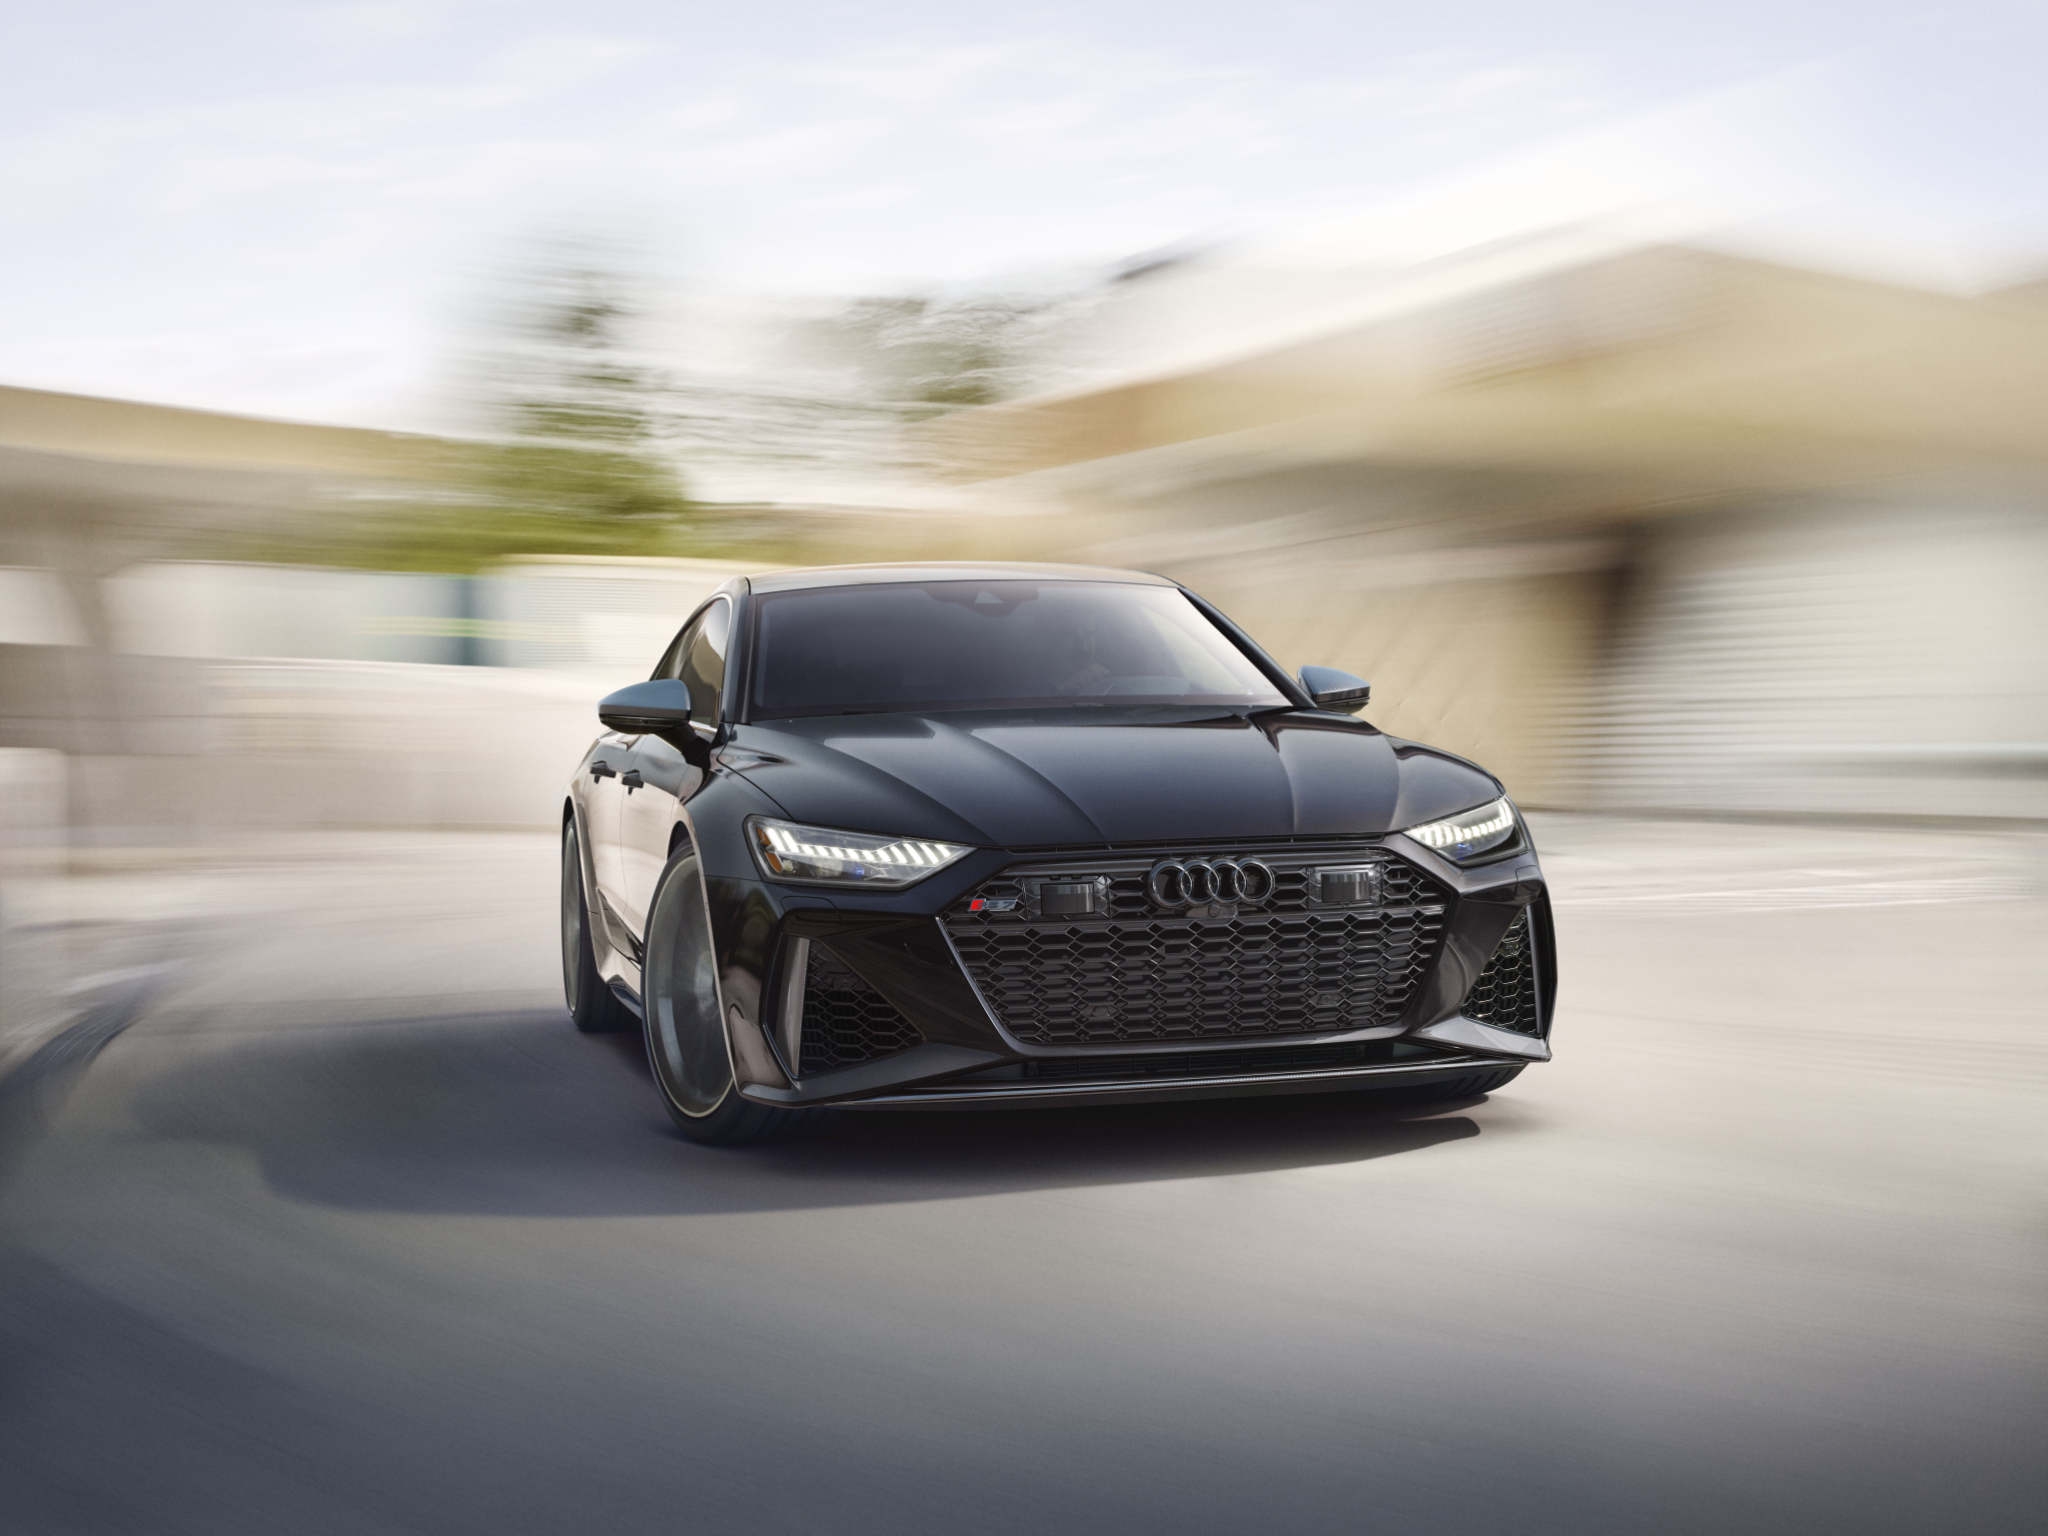 The Audi Rs Is Getting A Limited Edition Motorweek